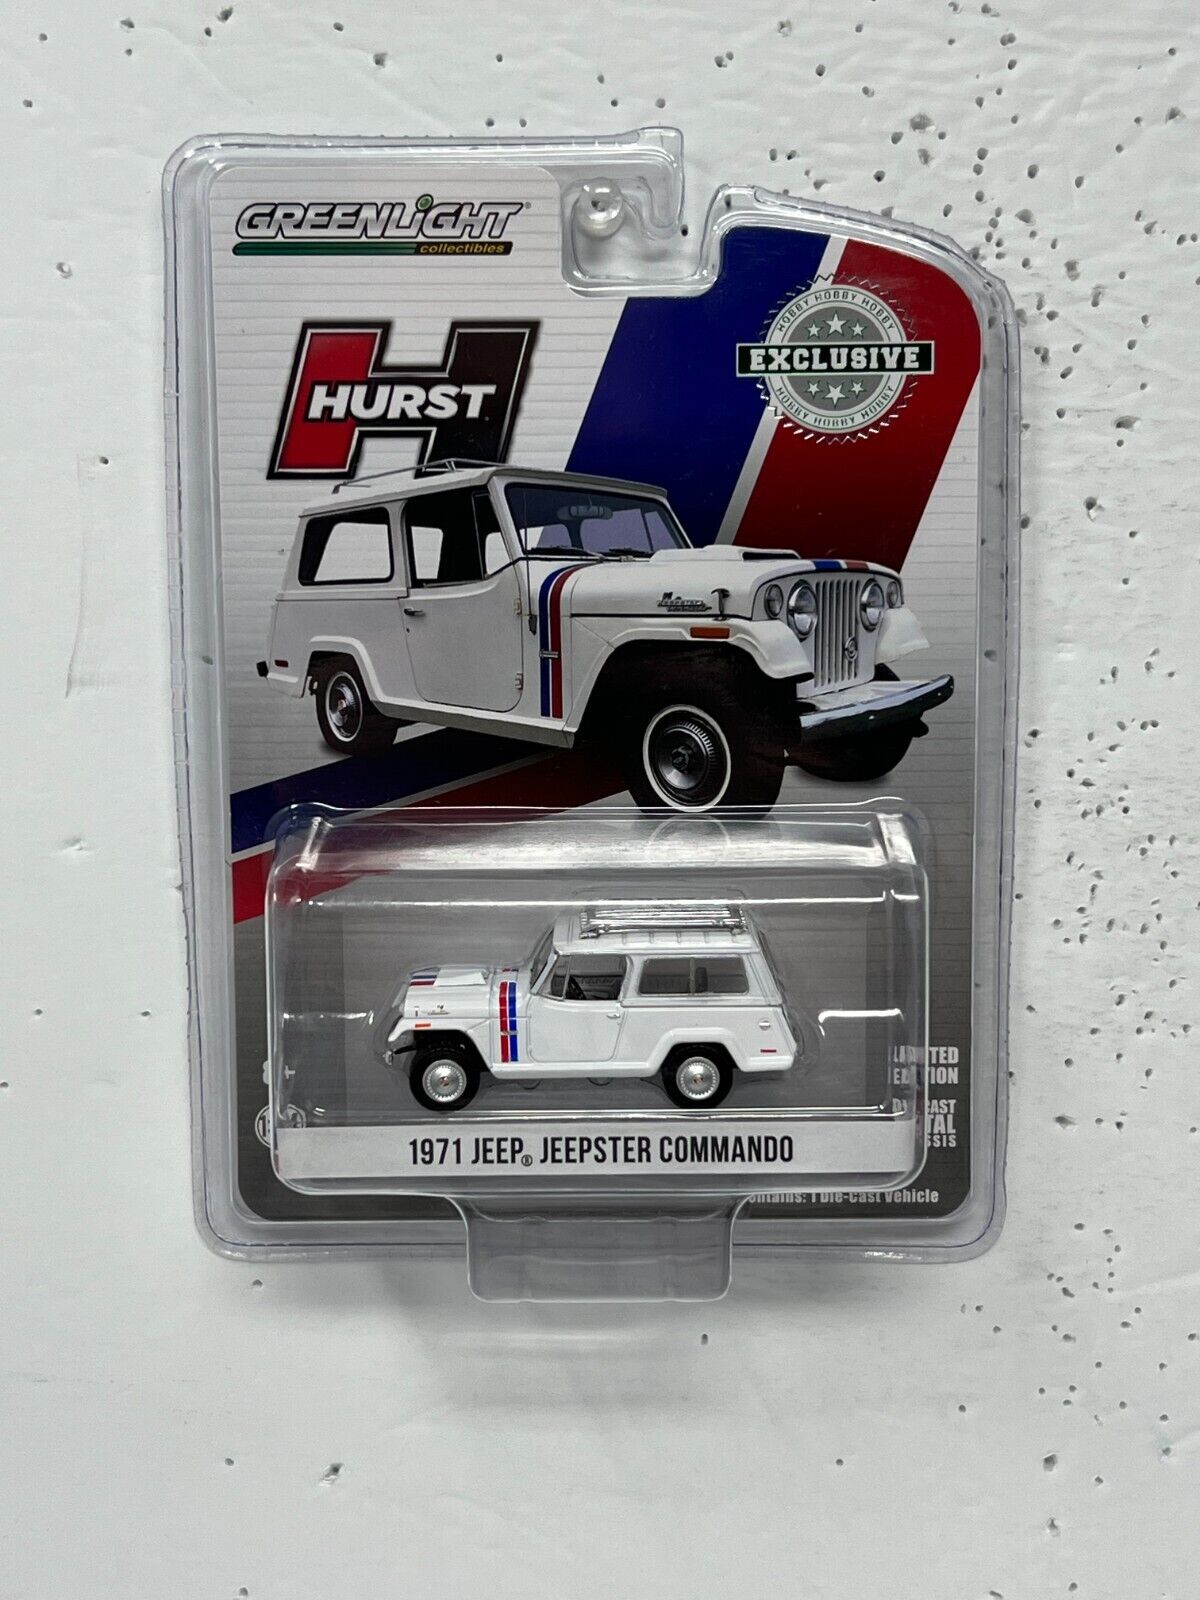 Greenlight Hobby Exclusive Hurst 1971 Jeep Jeepster Commando 1:64 Diecast